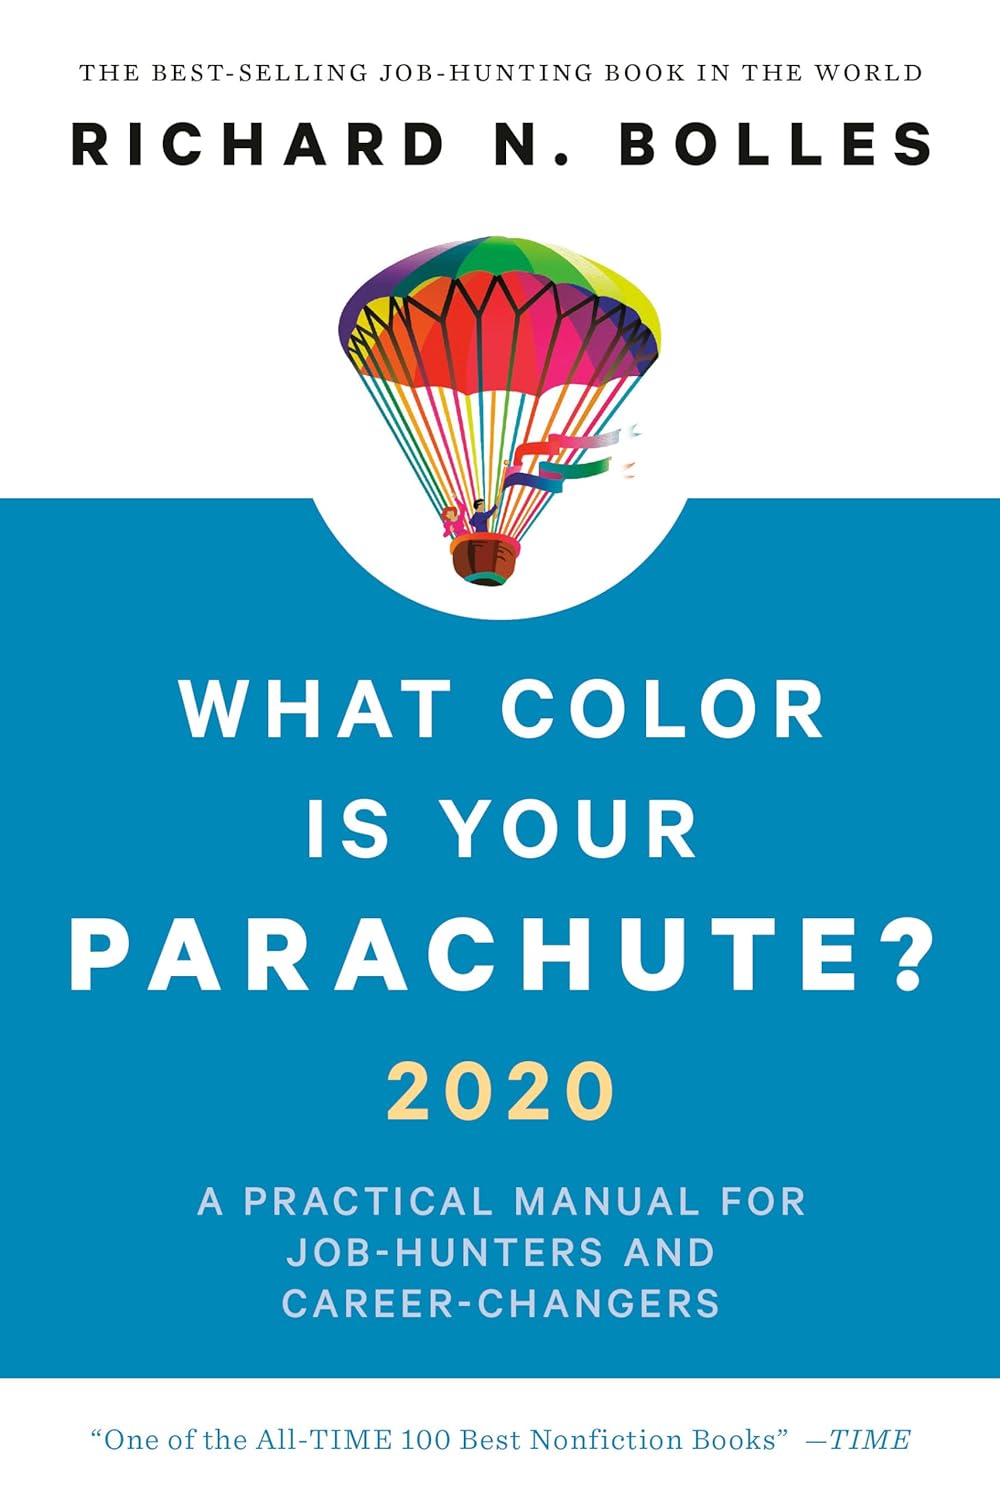 What Color Is Your Parachute? 2020 By Richard Nelson Bolles